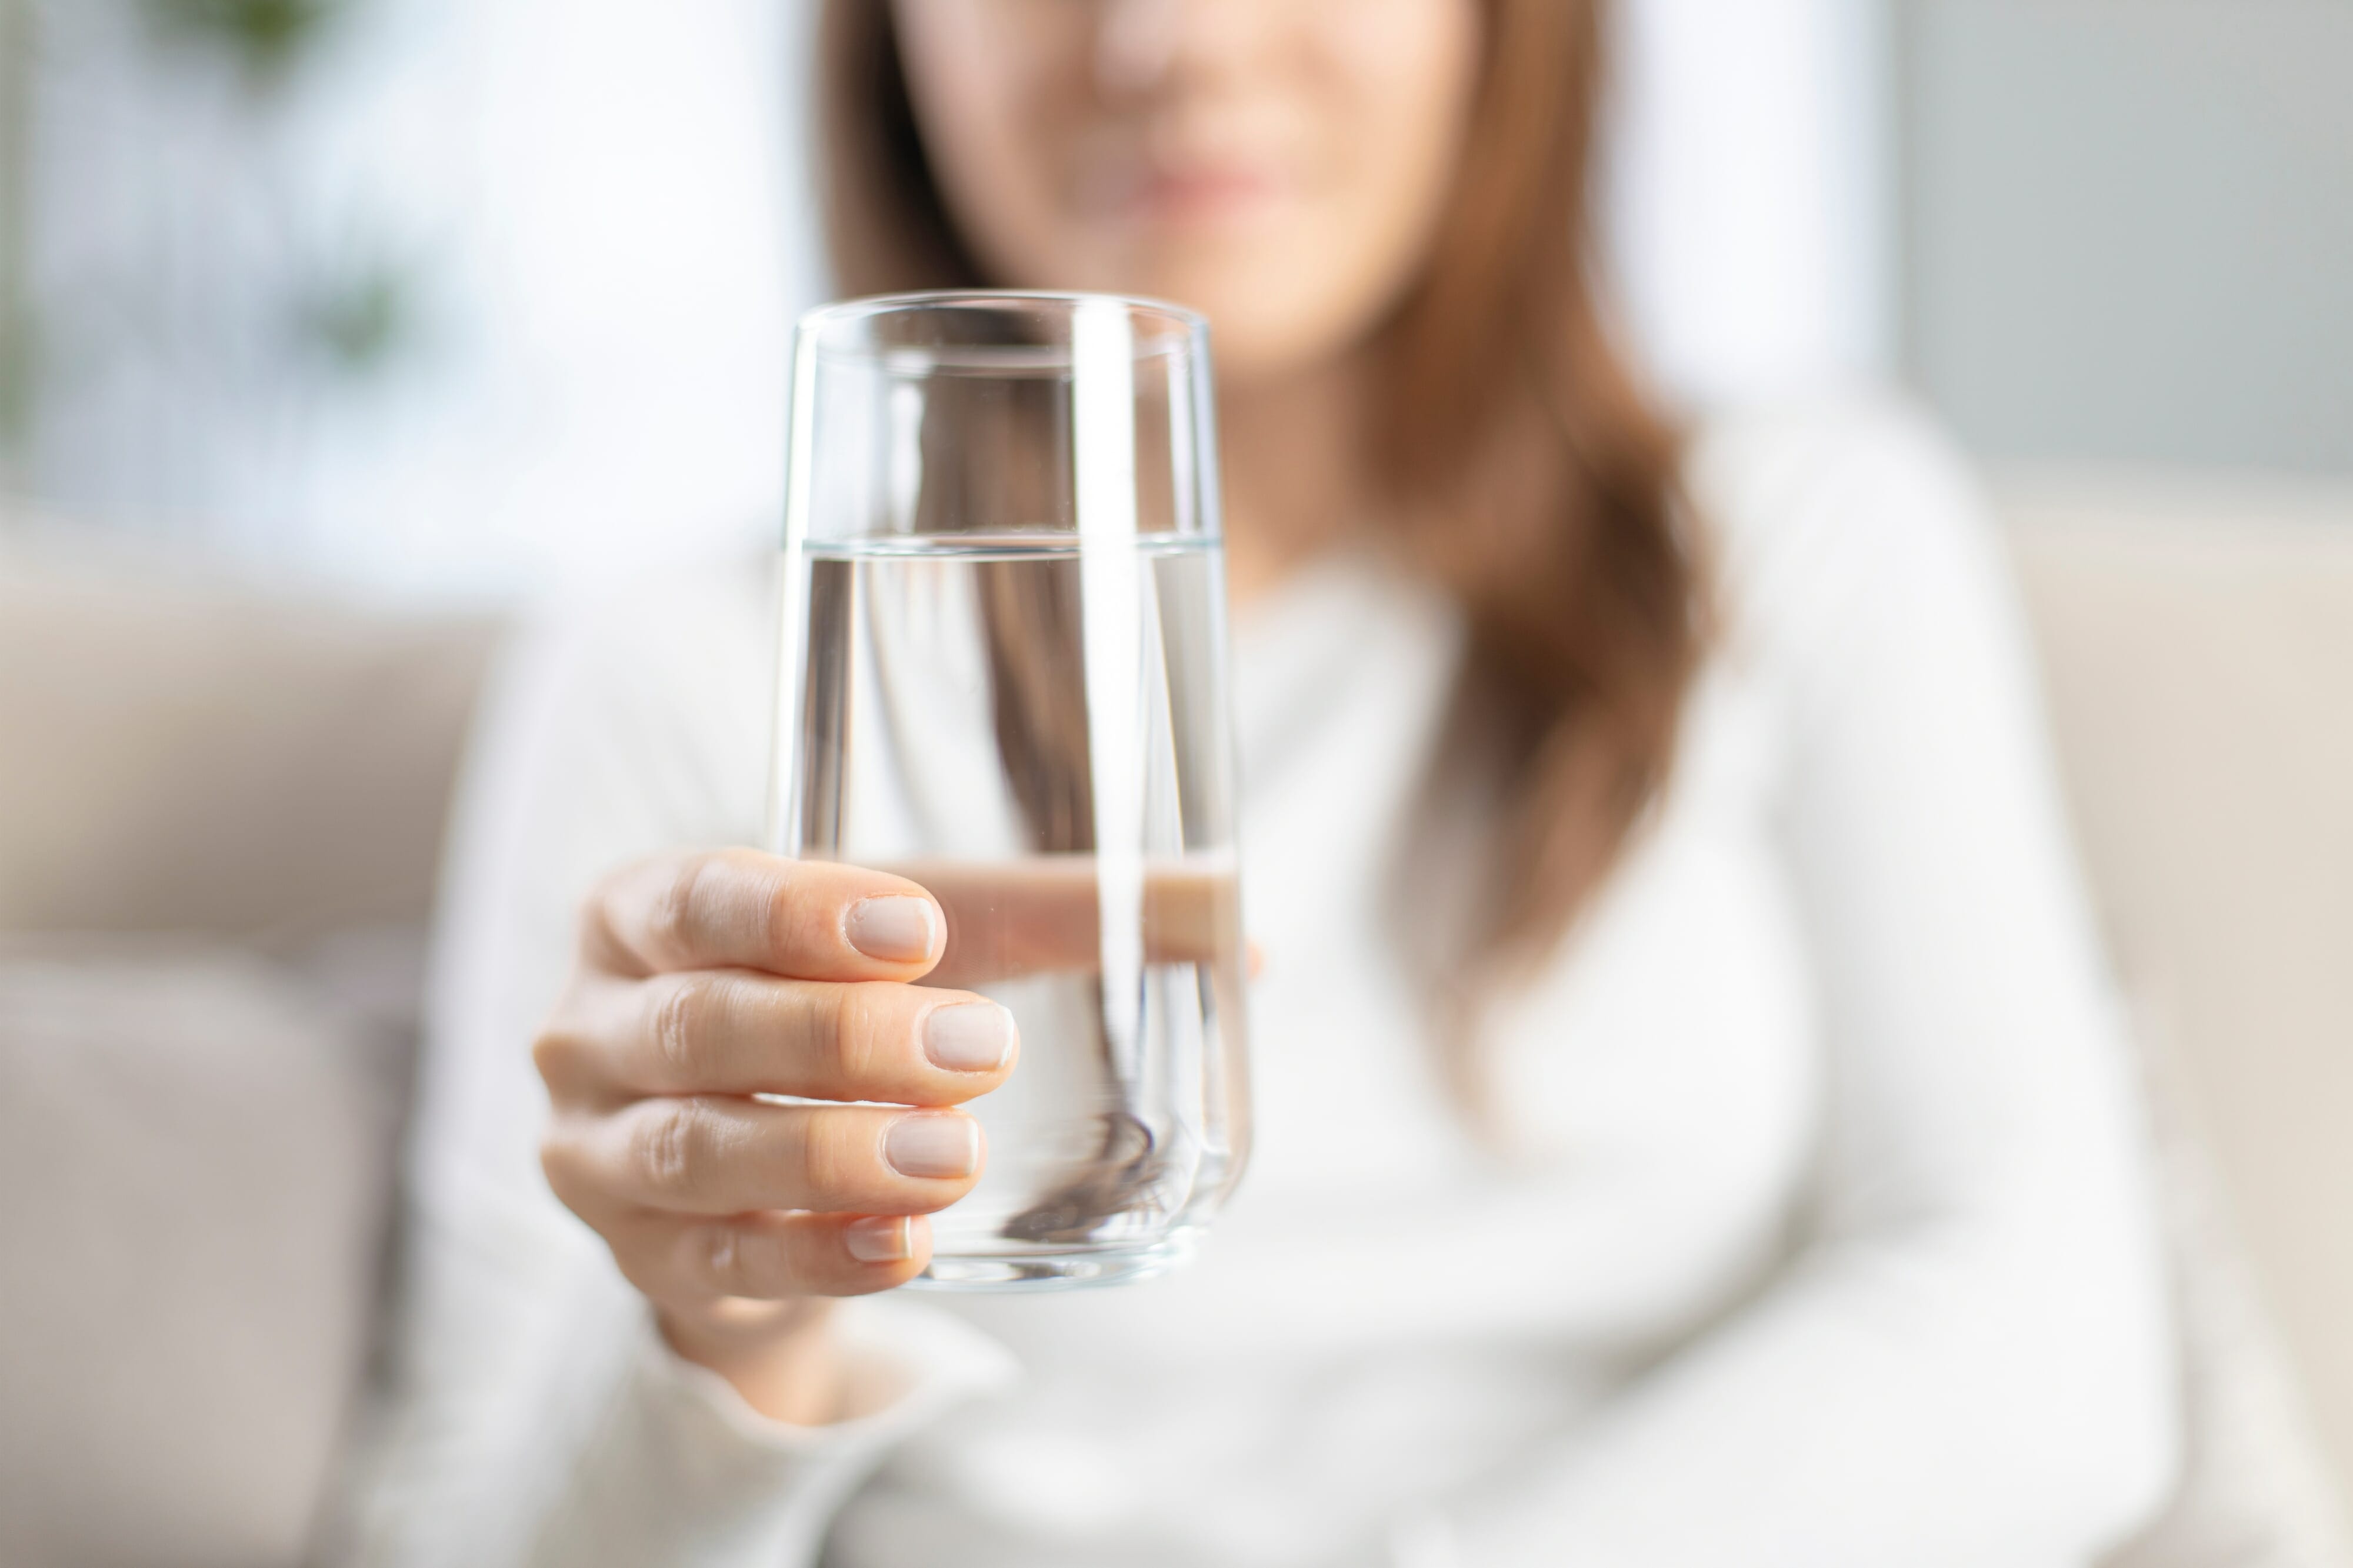 Close-up image of a woman holding a glass of mineral water